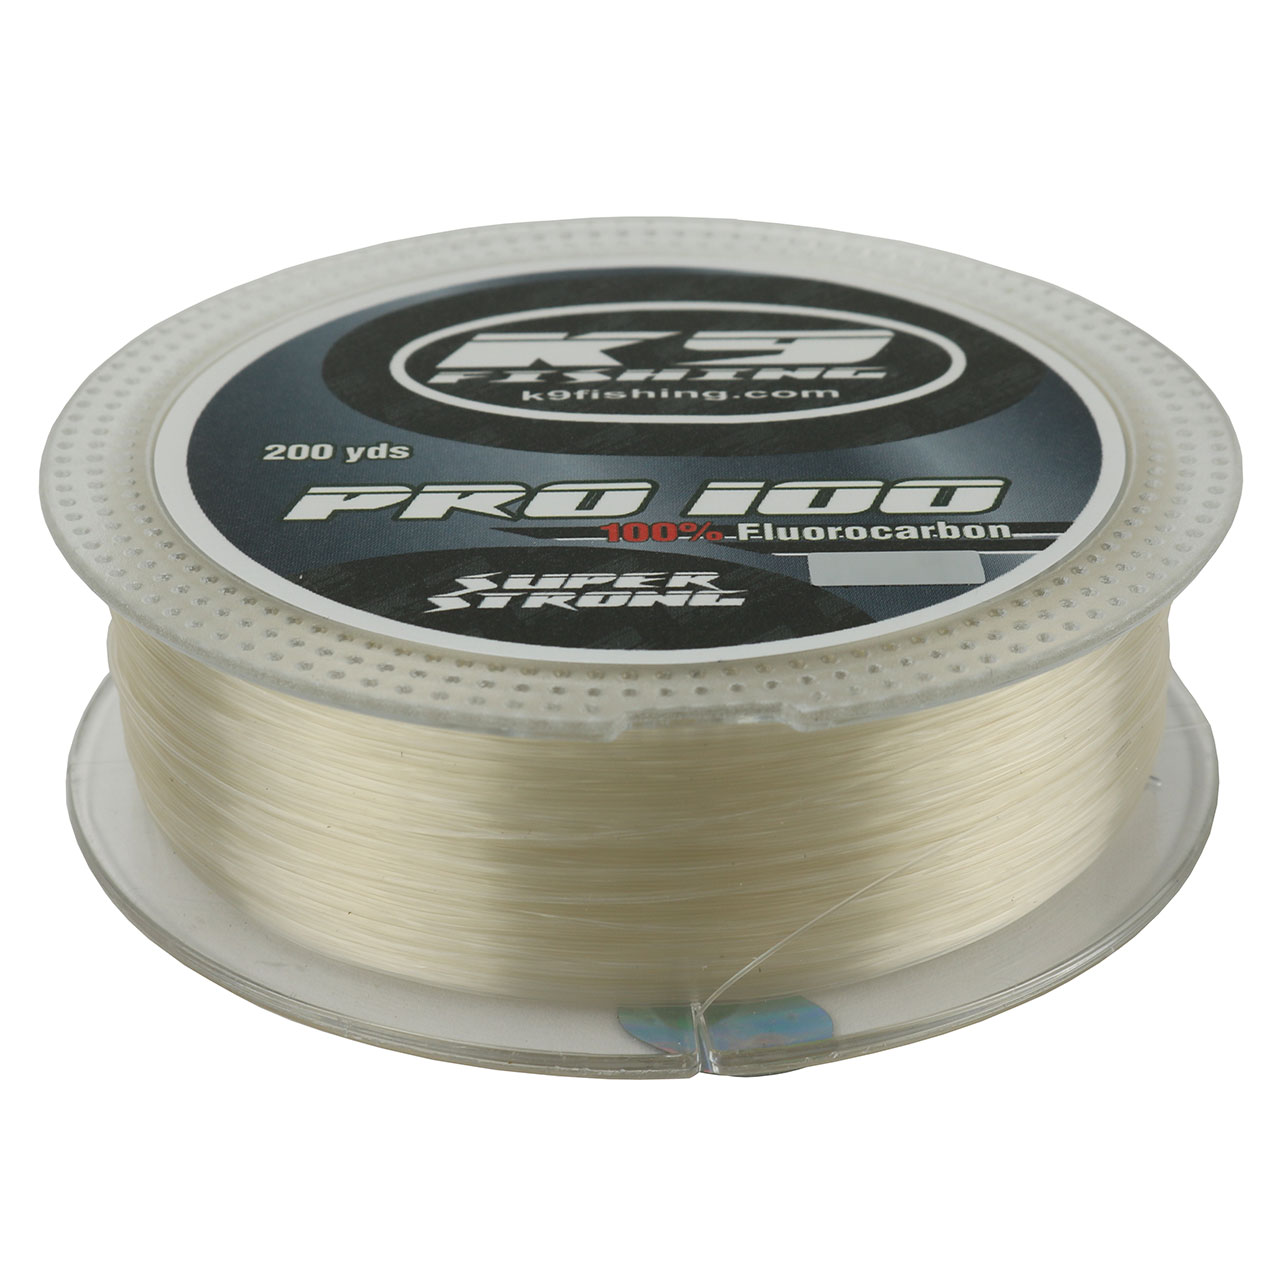 K9 Pro100 100% Fluorocarbon | Bob's Up The Creek Outfitters 18lb Test